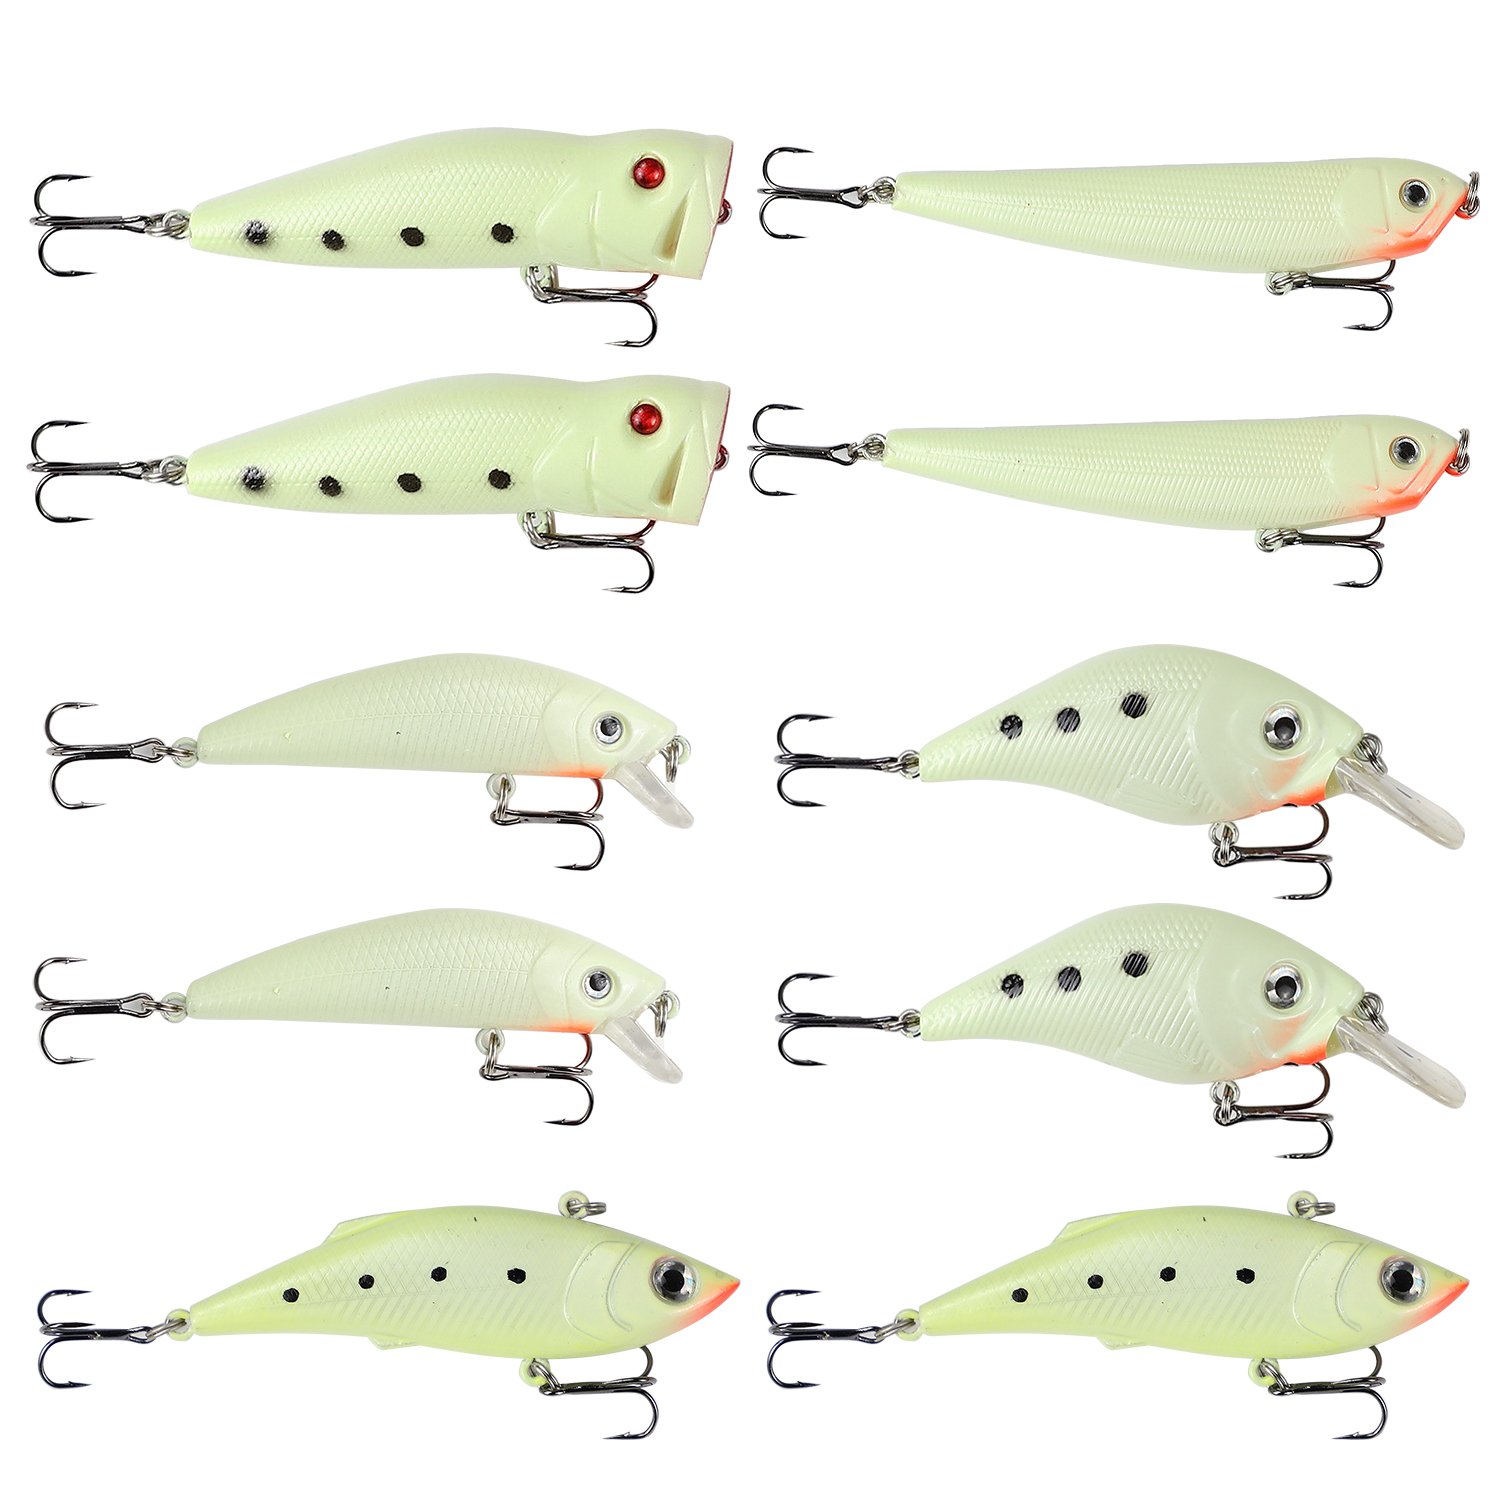 FREE FISHER Unpainted Fishing Lures,15pcs Lure Blanks Large Minnow  Artificial Bass Lures, Assorted Hard Plastic Square Crankbait Blank Lure  Baits 140mm/15.8g, Topwater Lures -  Canada